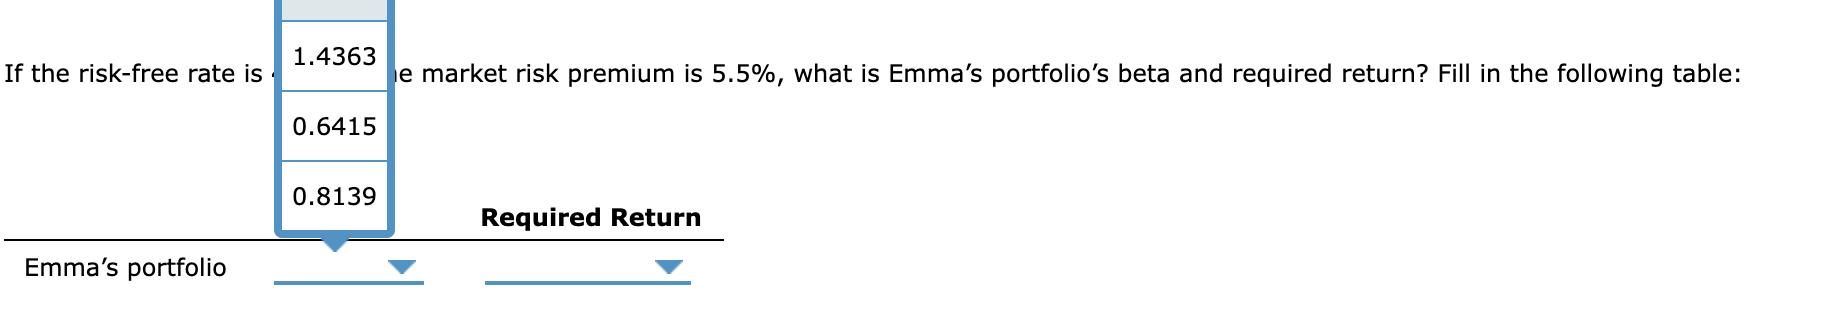 1.4363 If the risk-free rate is e market risk premium is 5.5%, what is Emmas portfolios beta and required return? Fill in t